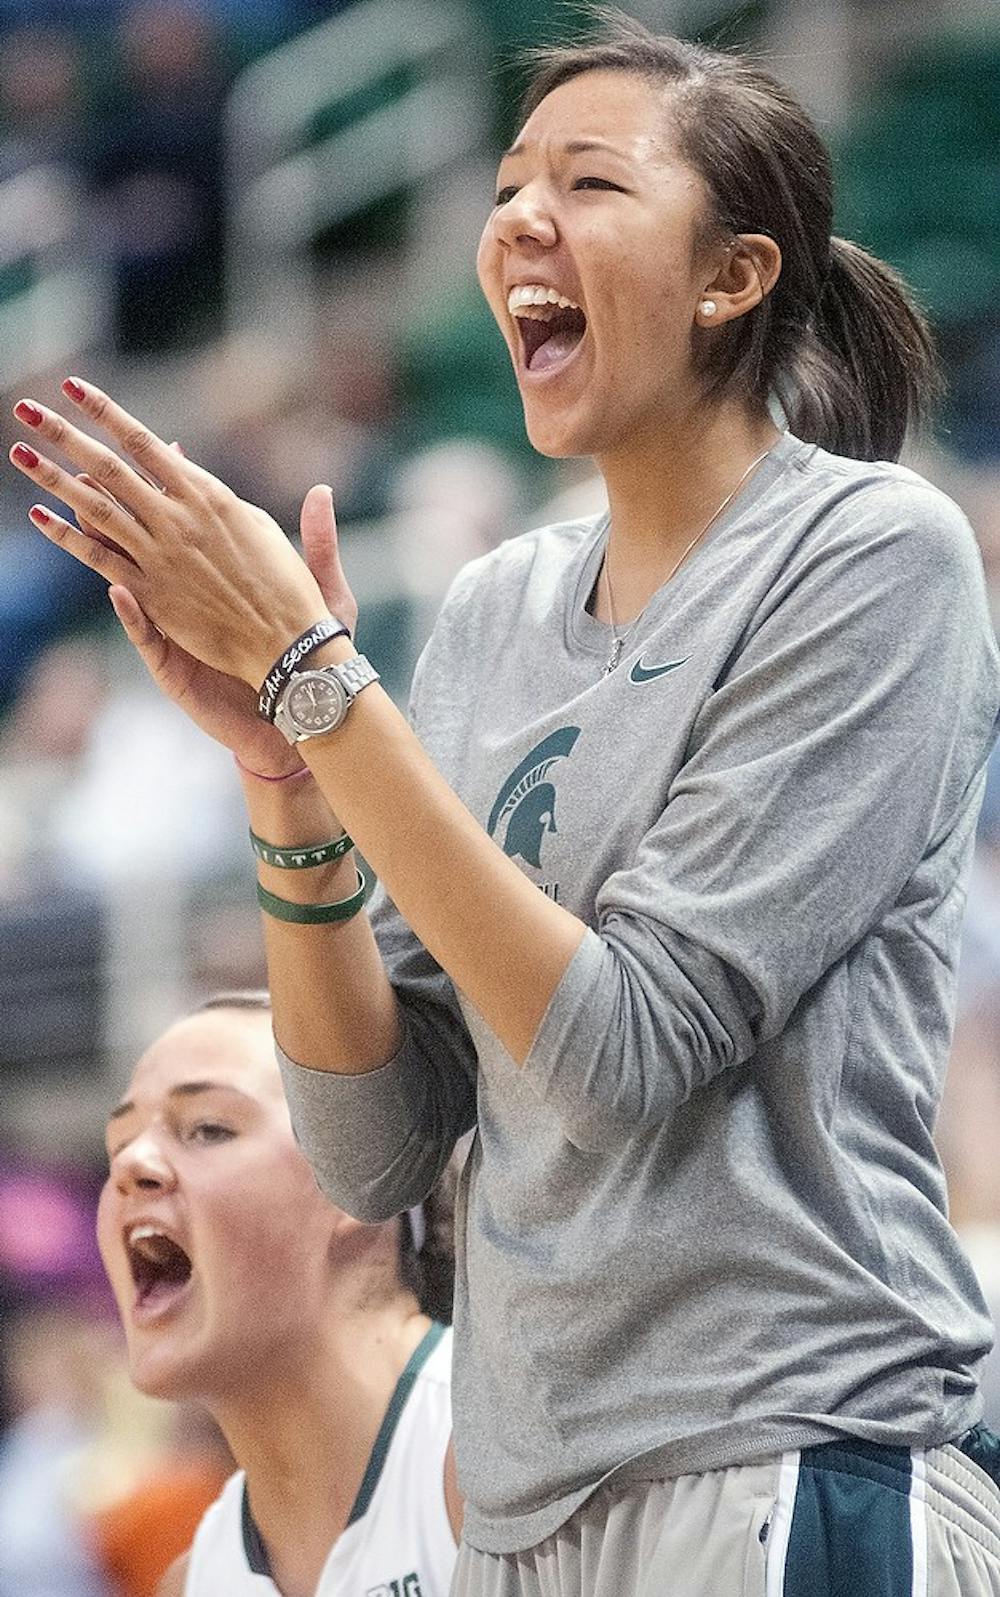 Sophomore center Madison Williams cheers from the bench after a shot is made Nov. 4, 2012, at Breslin Center. The women's basketball team defeated Grand Valley State 83-36 in the second and final exhibition game of the season. Adam Toolin/The State News